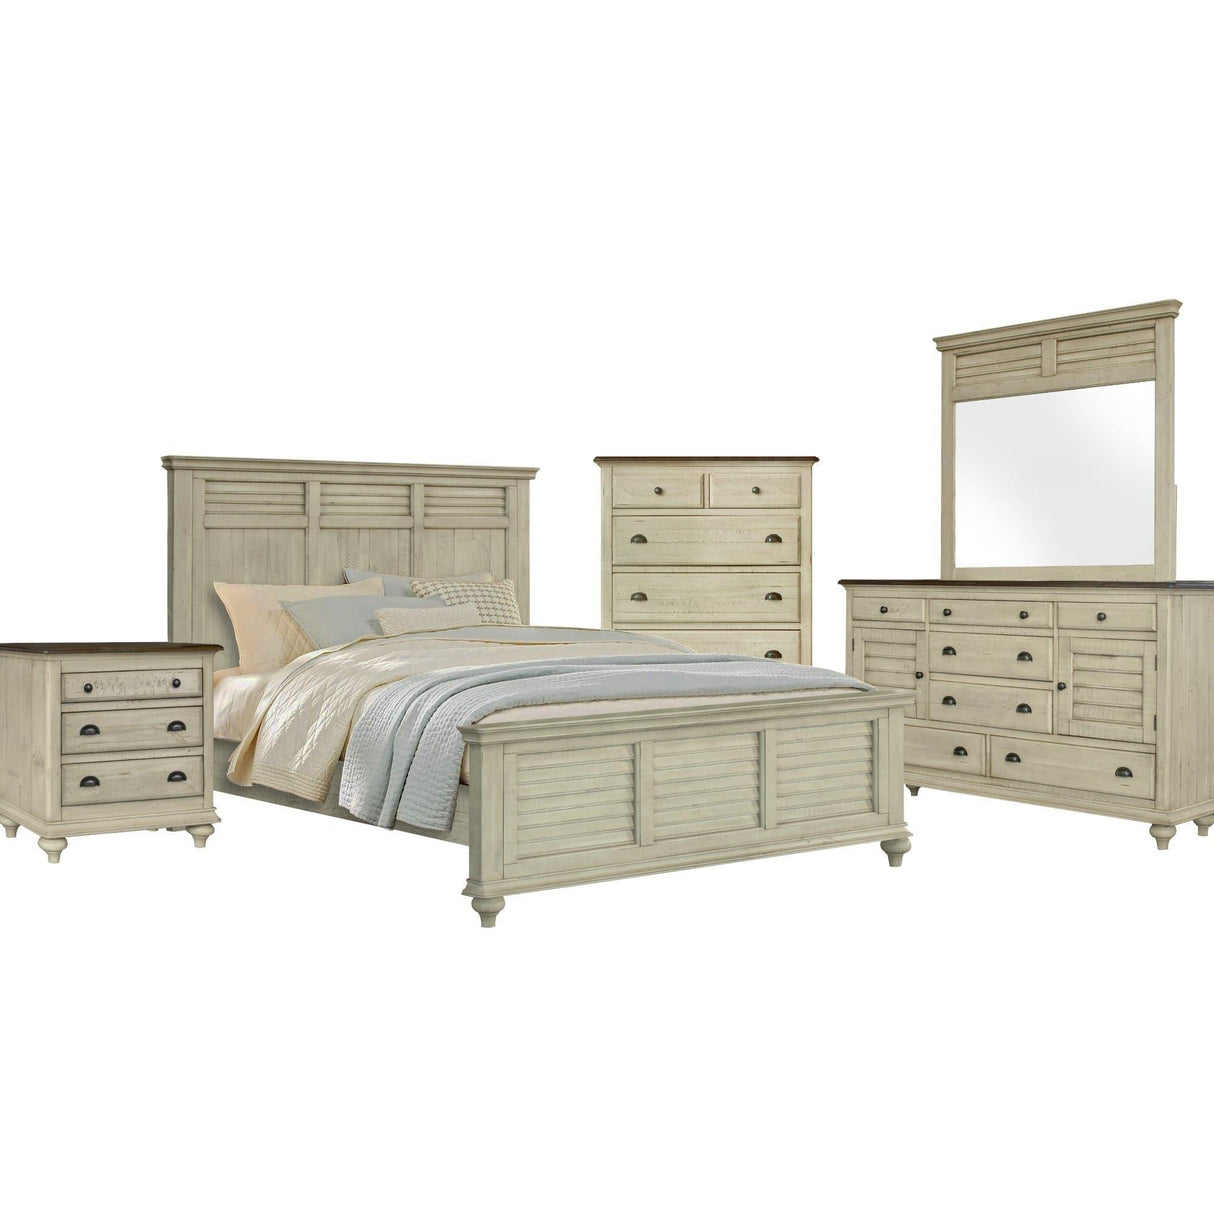 Sunset Trading Shades of Sand 5 Piece King Bedroom Set | Cream/Walnut Brown Solid Wood CF-2302-0489-K-5PC - Bedroom Depot USA